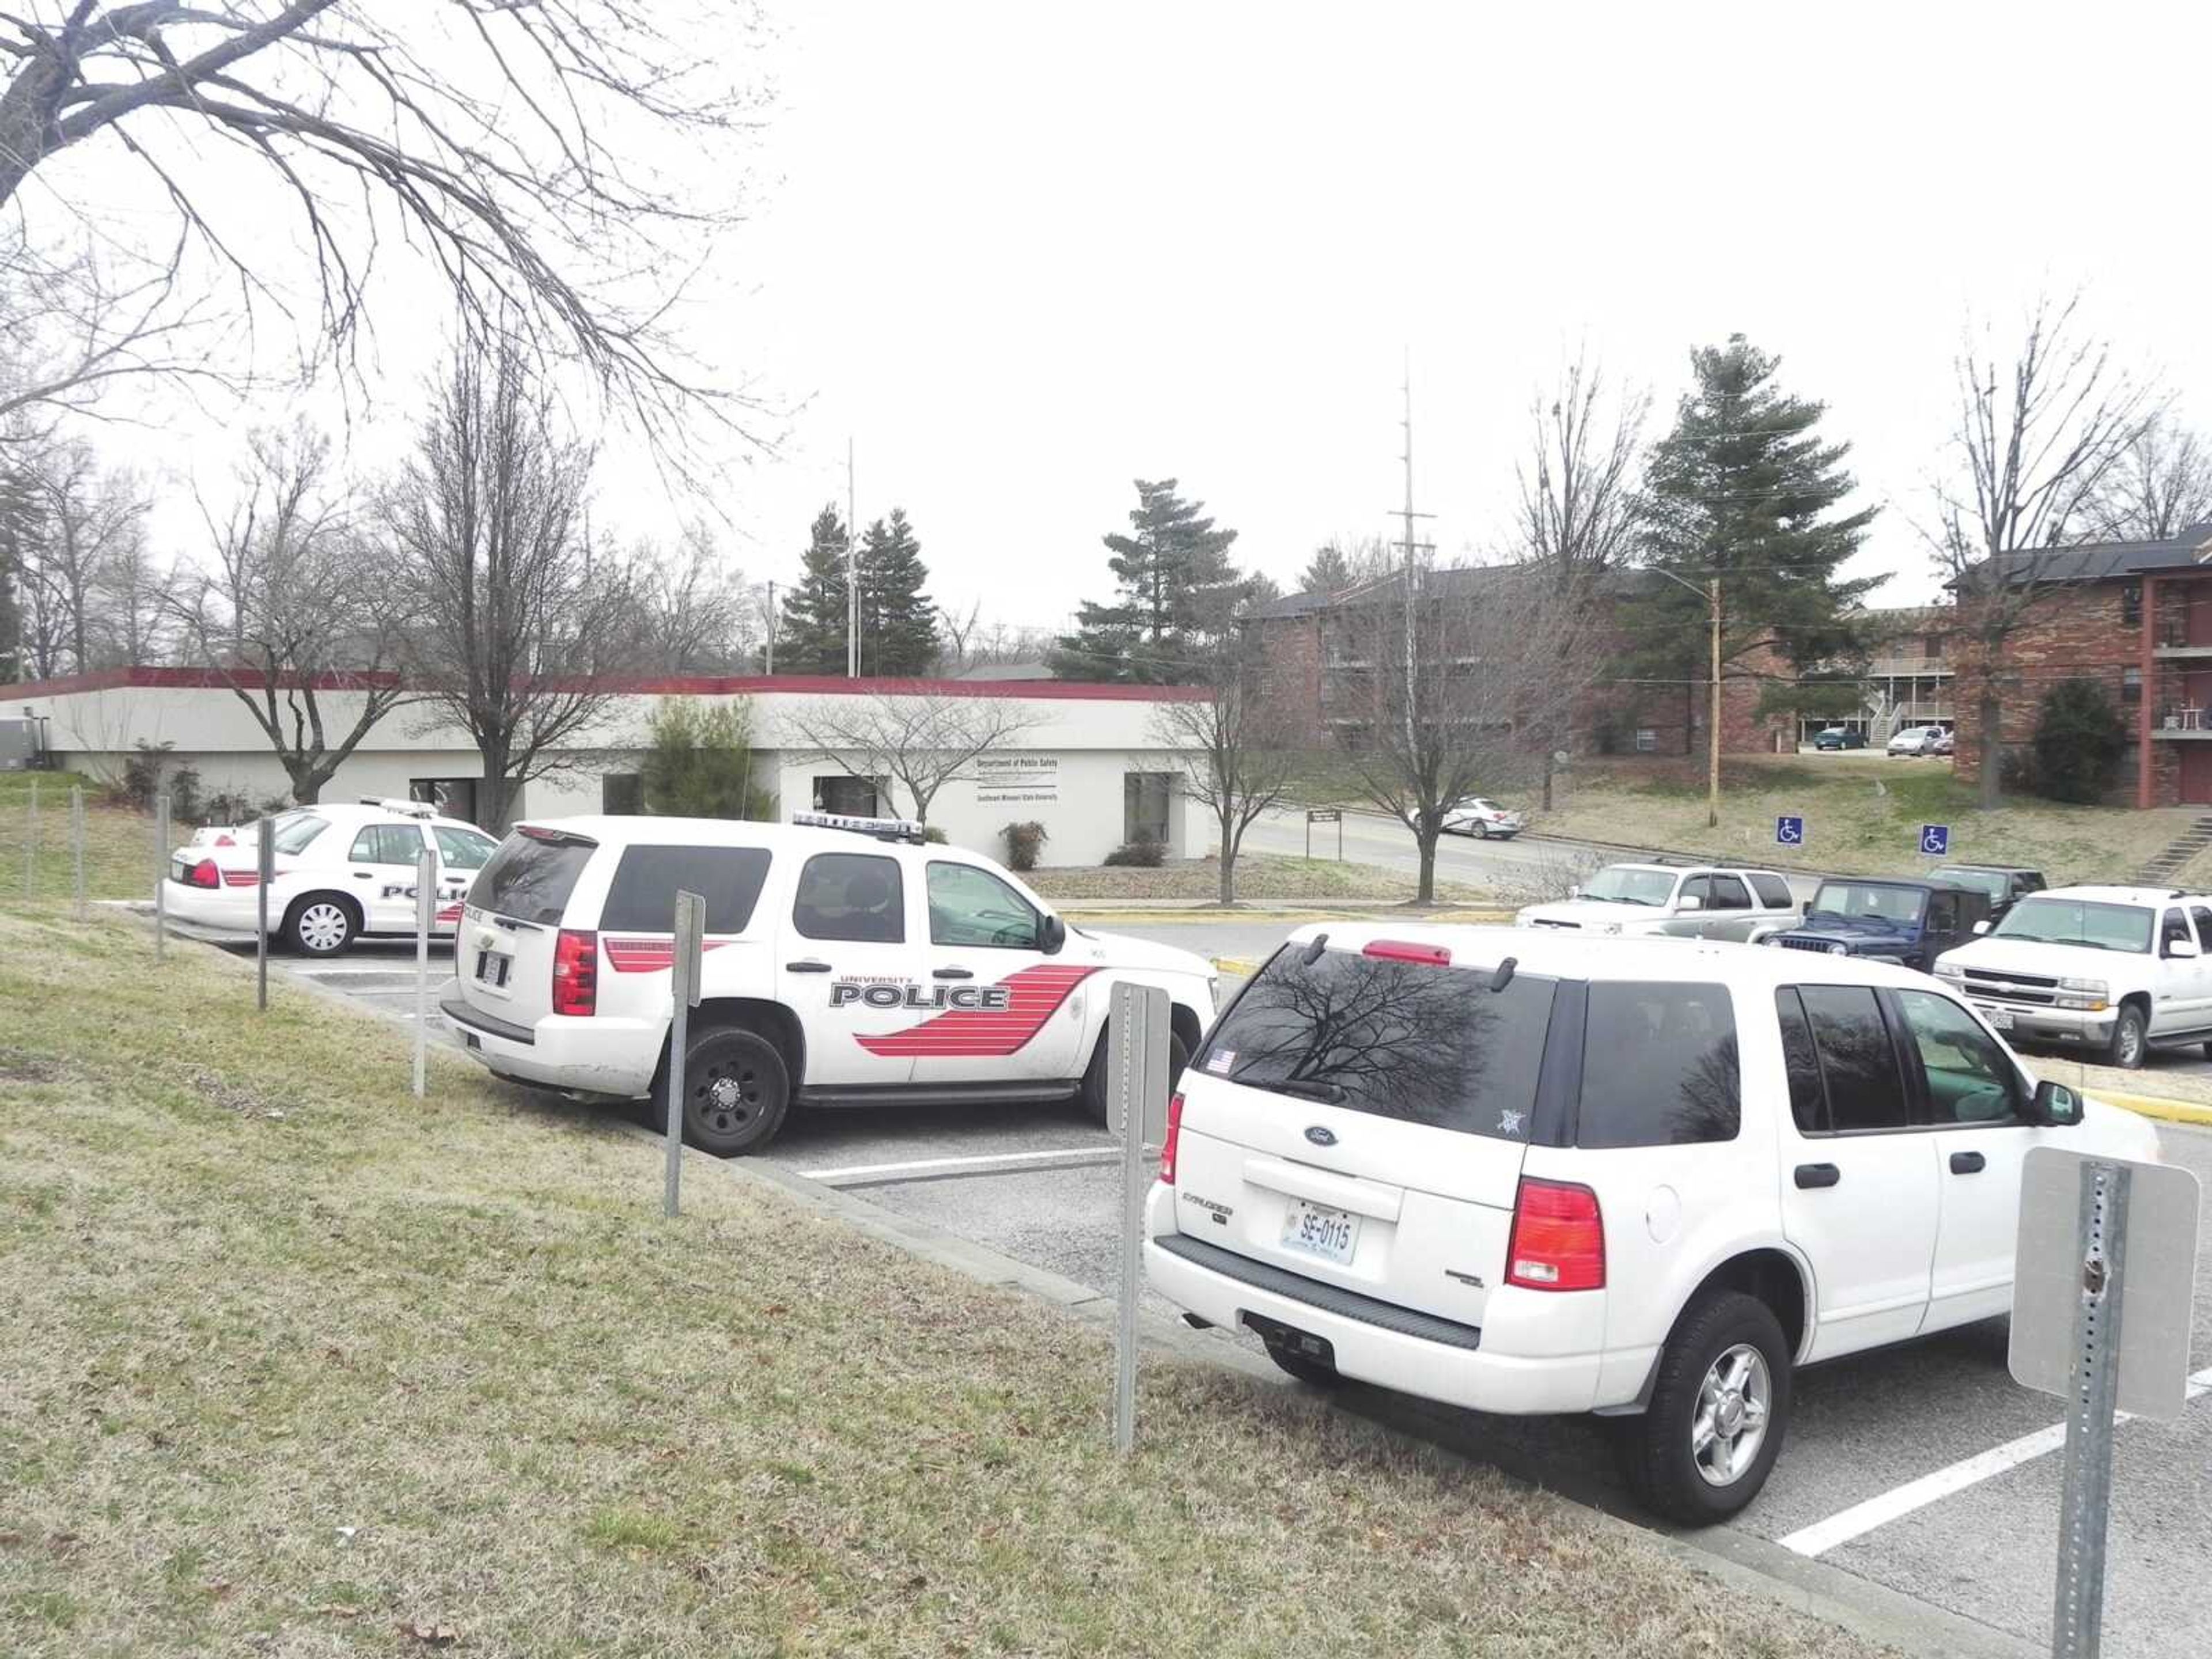 Southeastâ€™s Department of Public Safety has been assisting the Carbondale Police Department since the investigation began Sunday, March 27.